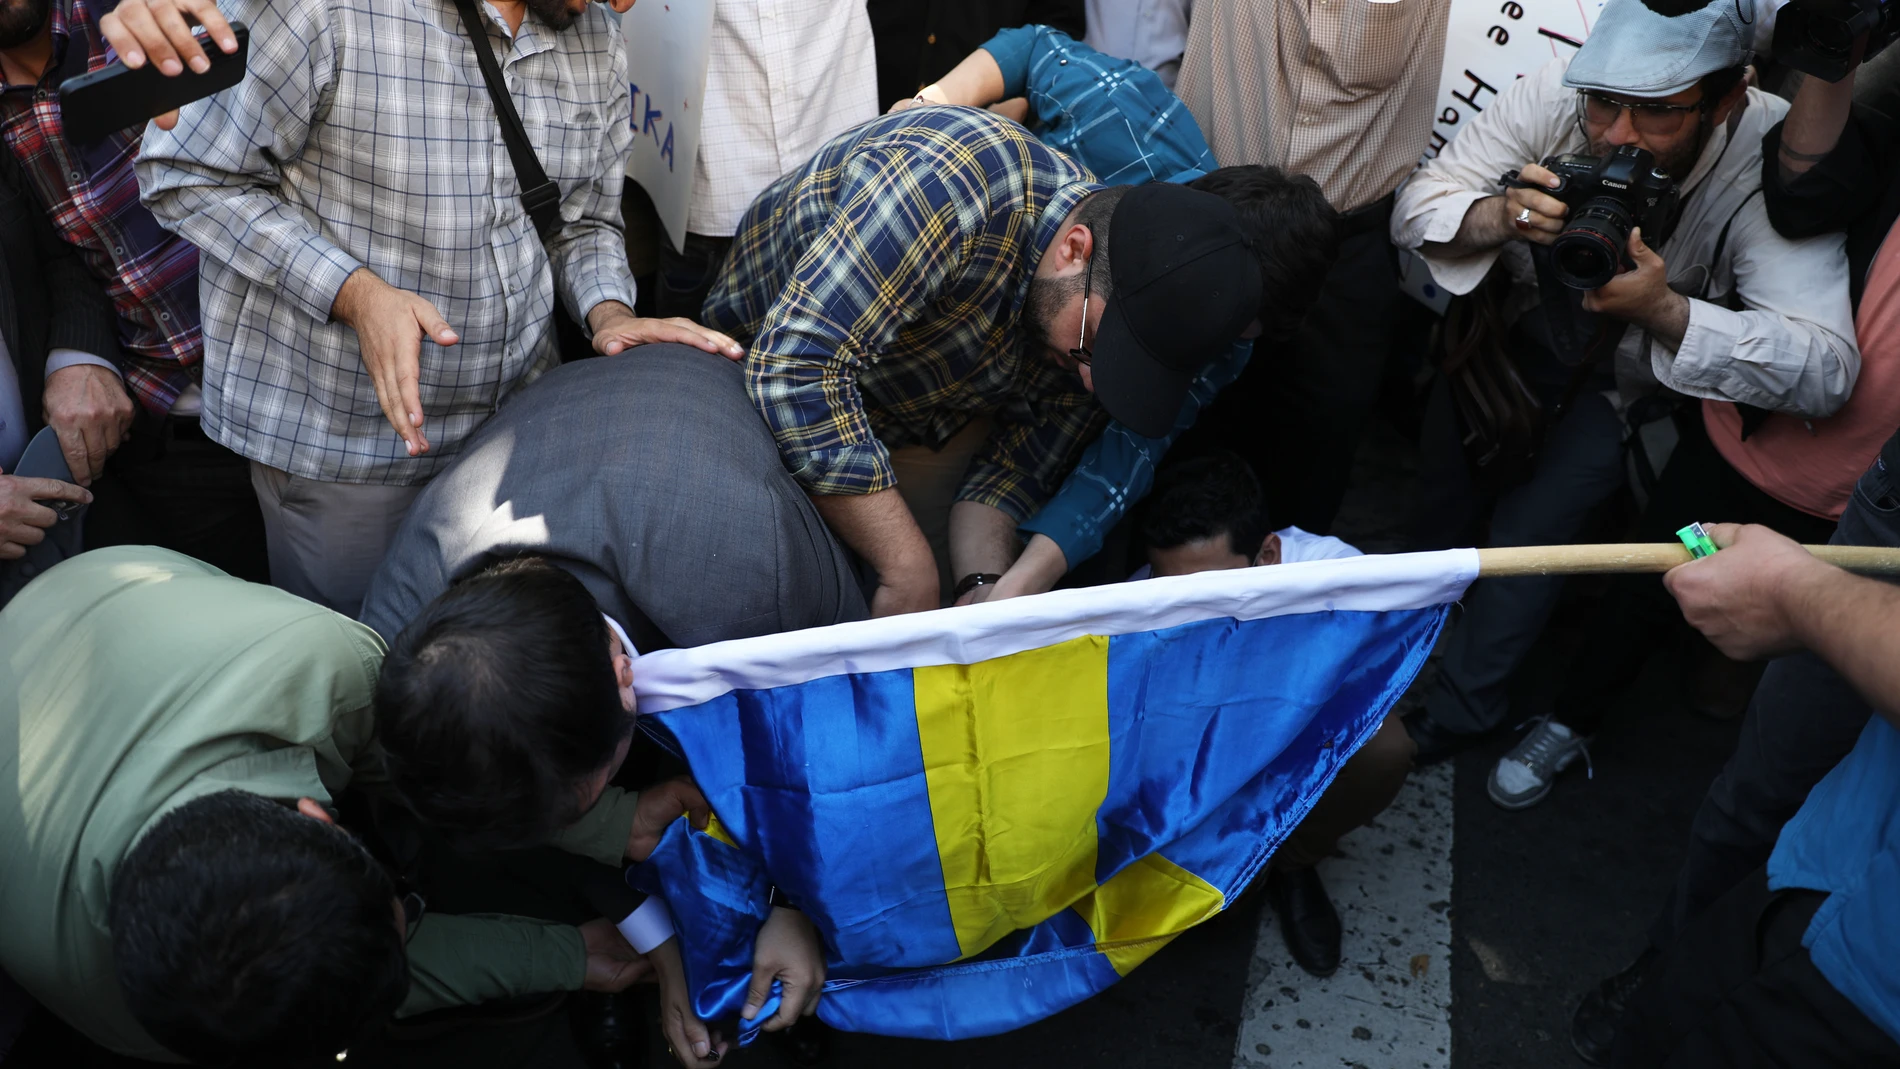 June 30, 2023, Tehran, Tehran, Iran: Iranian demonstrators burn a Swedish flag during a protest of the burning of a Quran in Sweden, in front of the Swedish Embassy in Tehran, Iran, Friday, June 30, 2023. On Wednesday, a man who identified himself in Swedish media as a refugee from Iraq burned a Quran outside a mosque in central Stockholm. (Foto de ARCHIVO) 30/06/2023